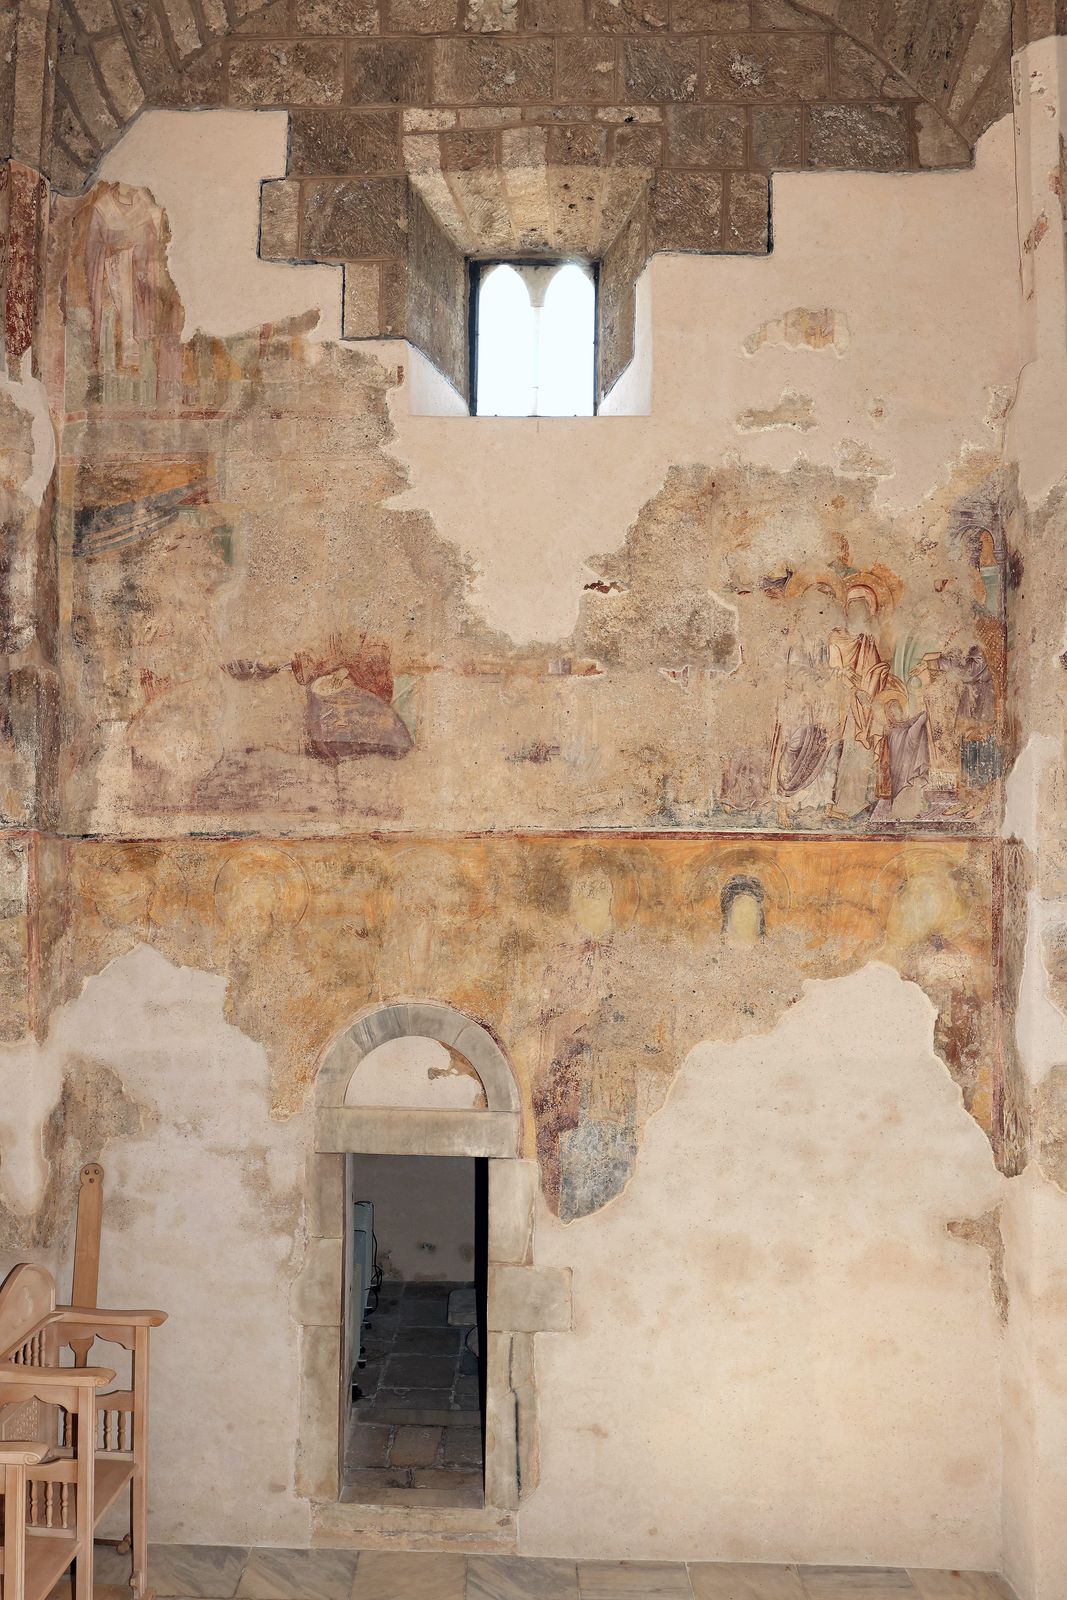 The north wall of the narthex